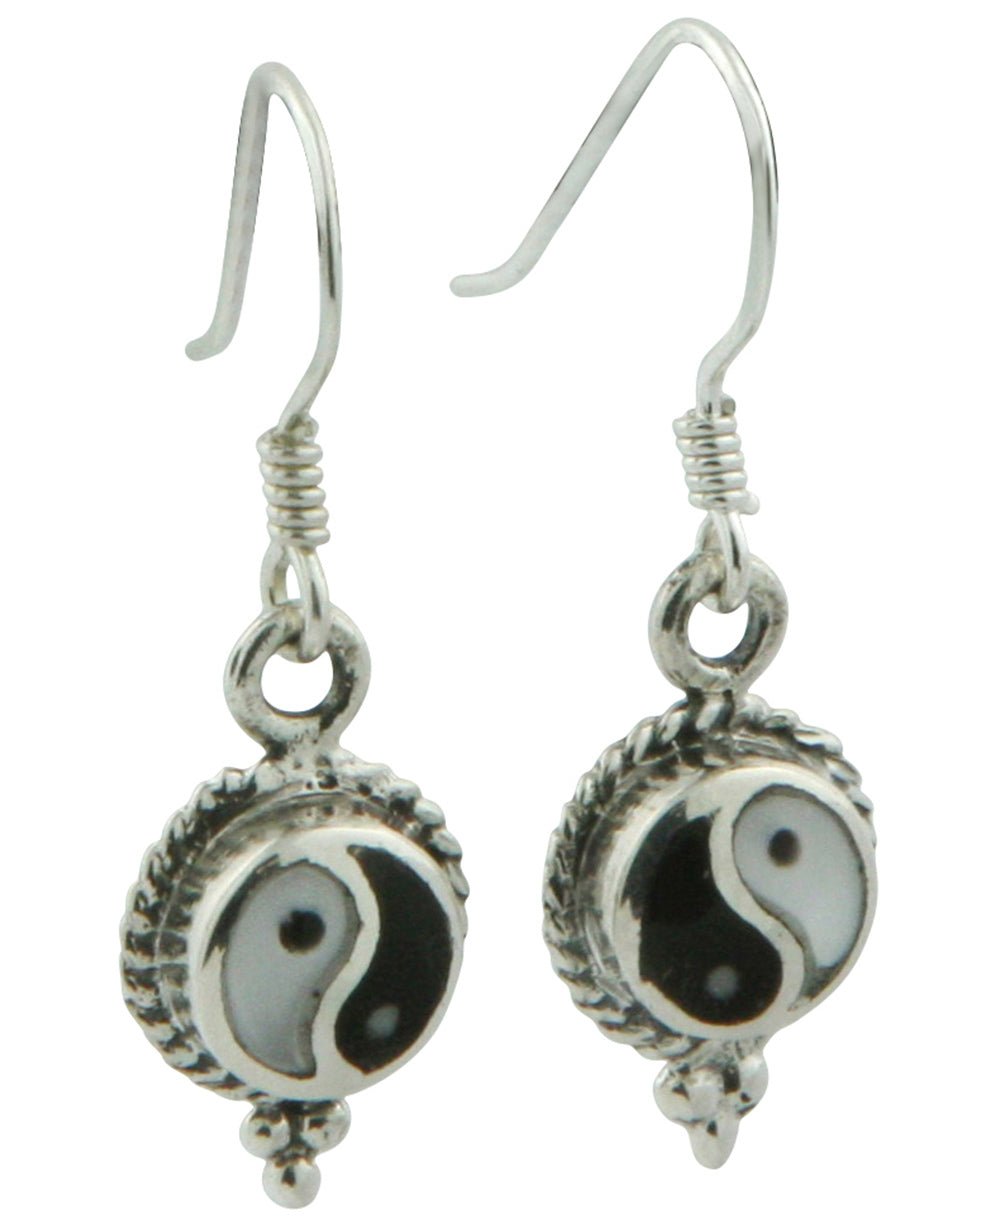 Delicate Yin Yang Earrings with Black Onyx and Mother of Pearl -